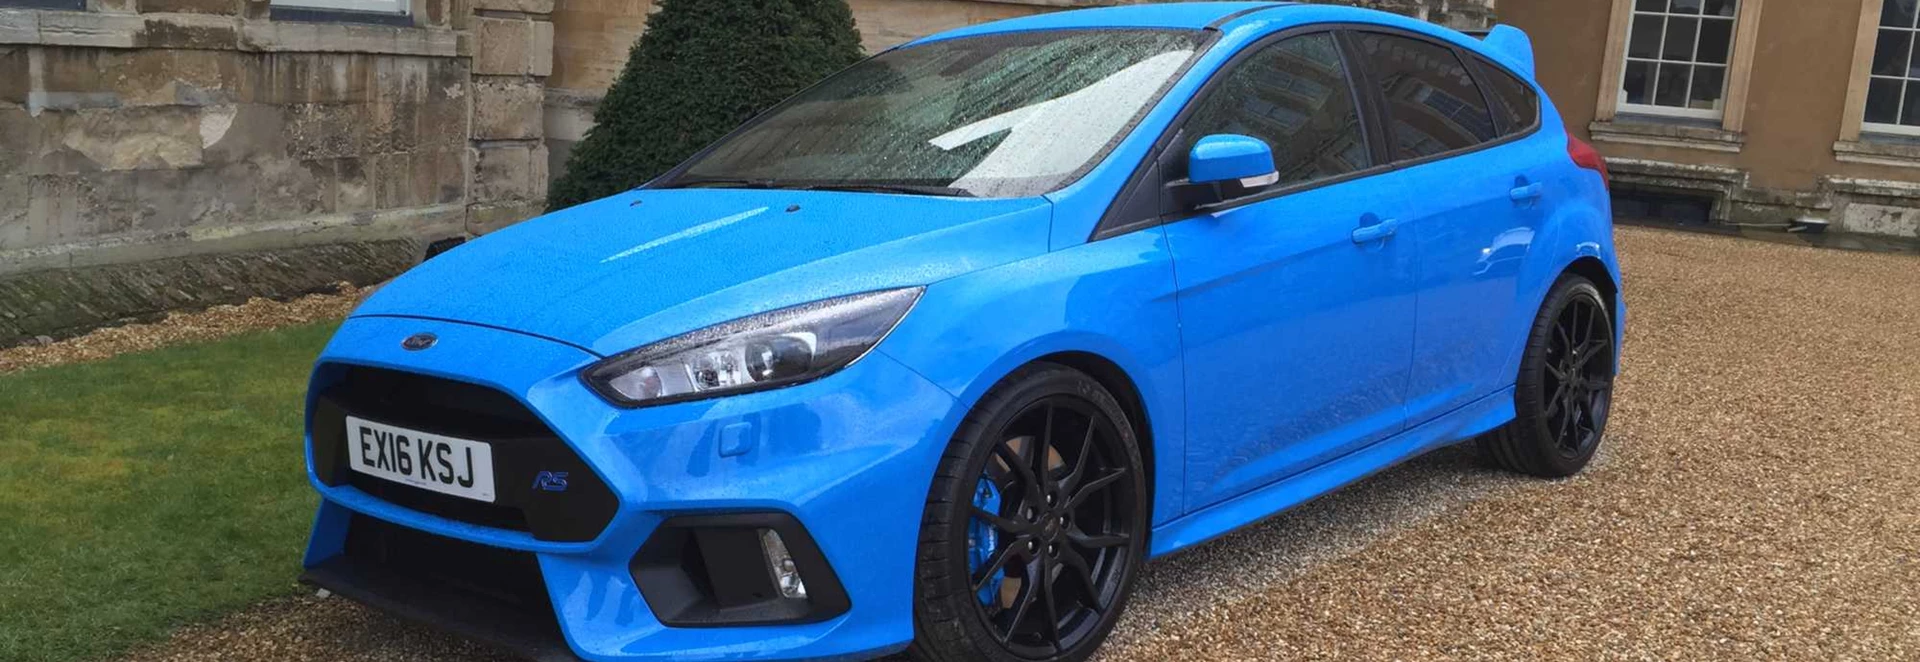 Ford Focus RS hatchback review 